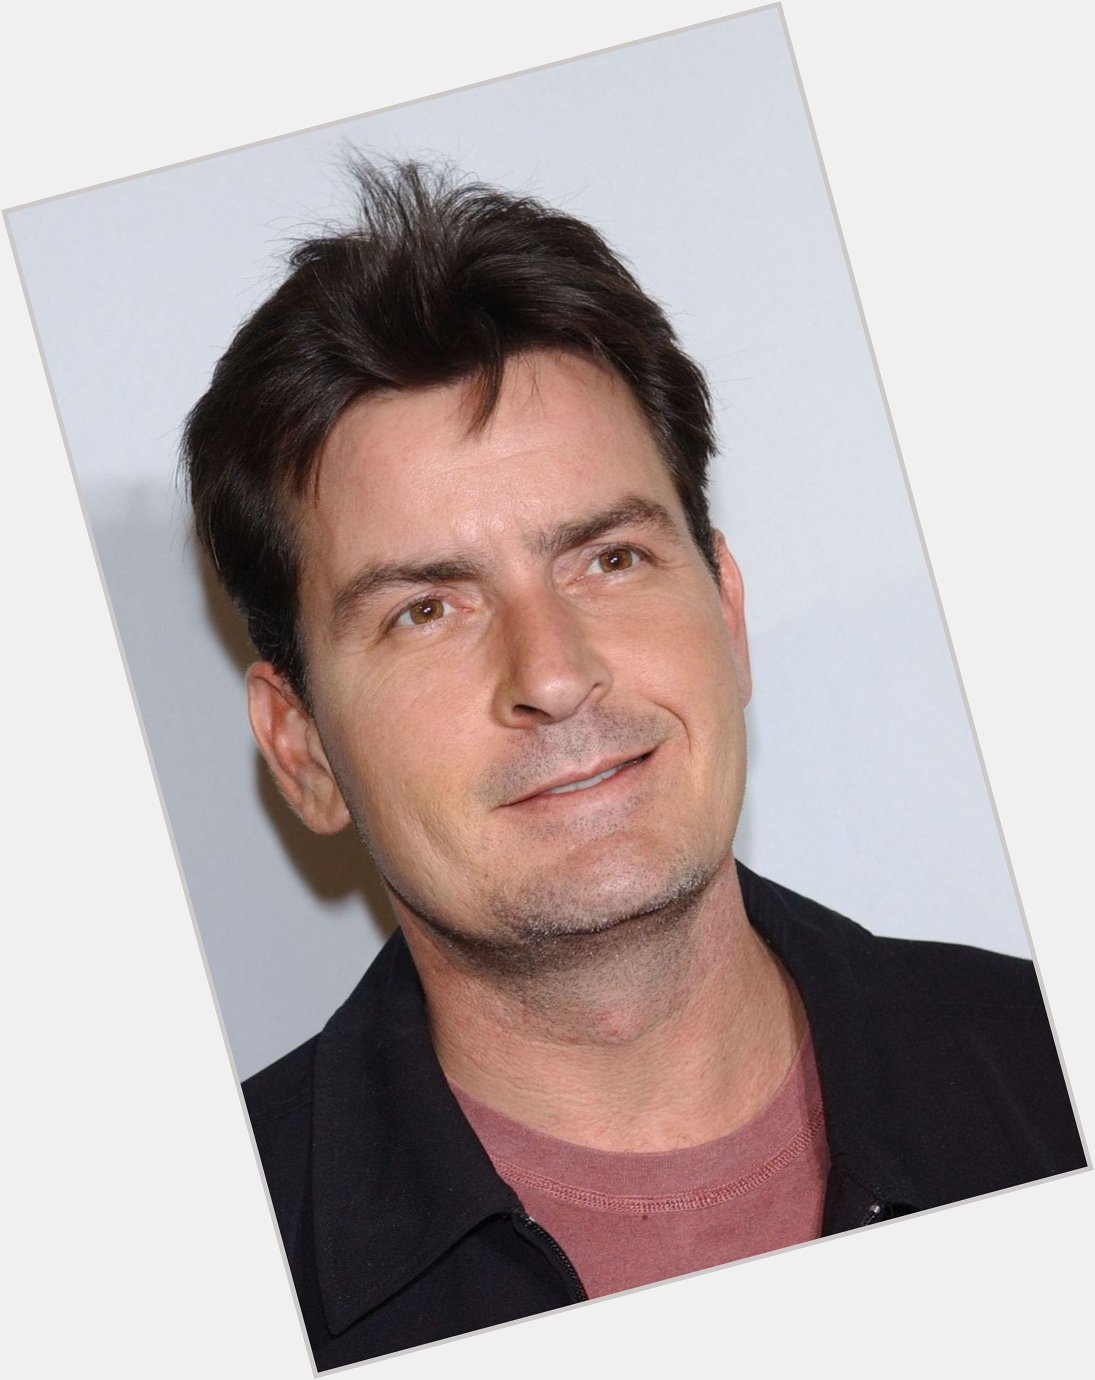 Happy Birthday to Charlie Sheen who turns 54 today! 